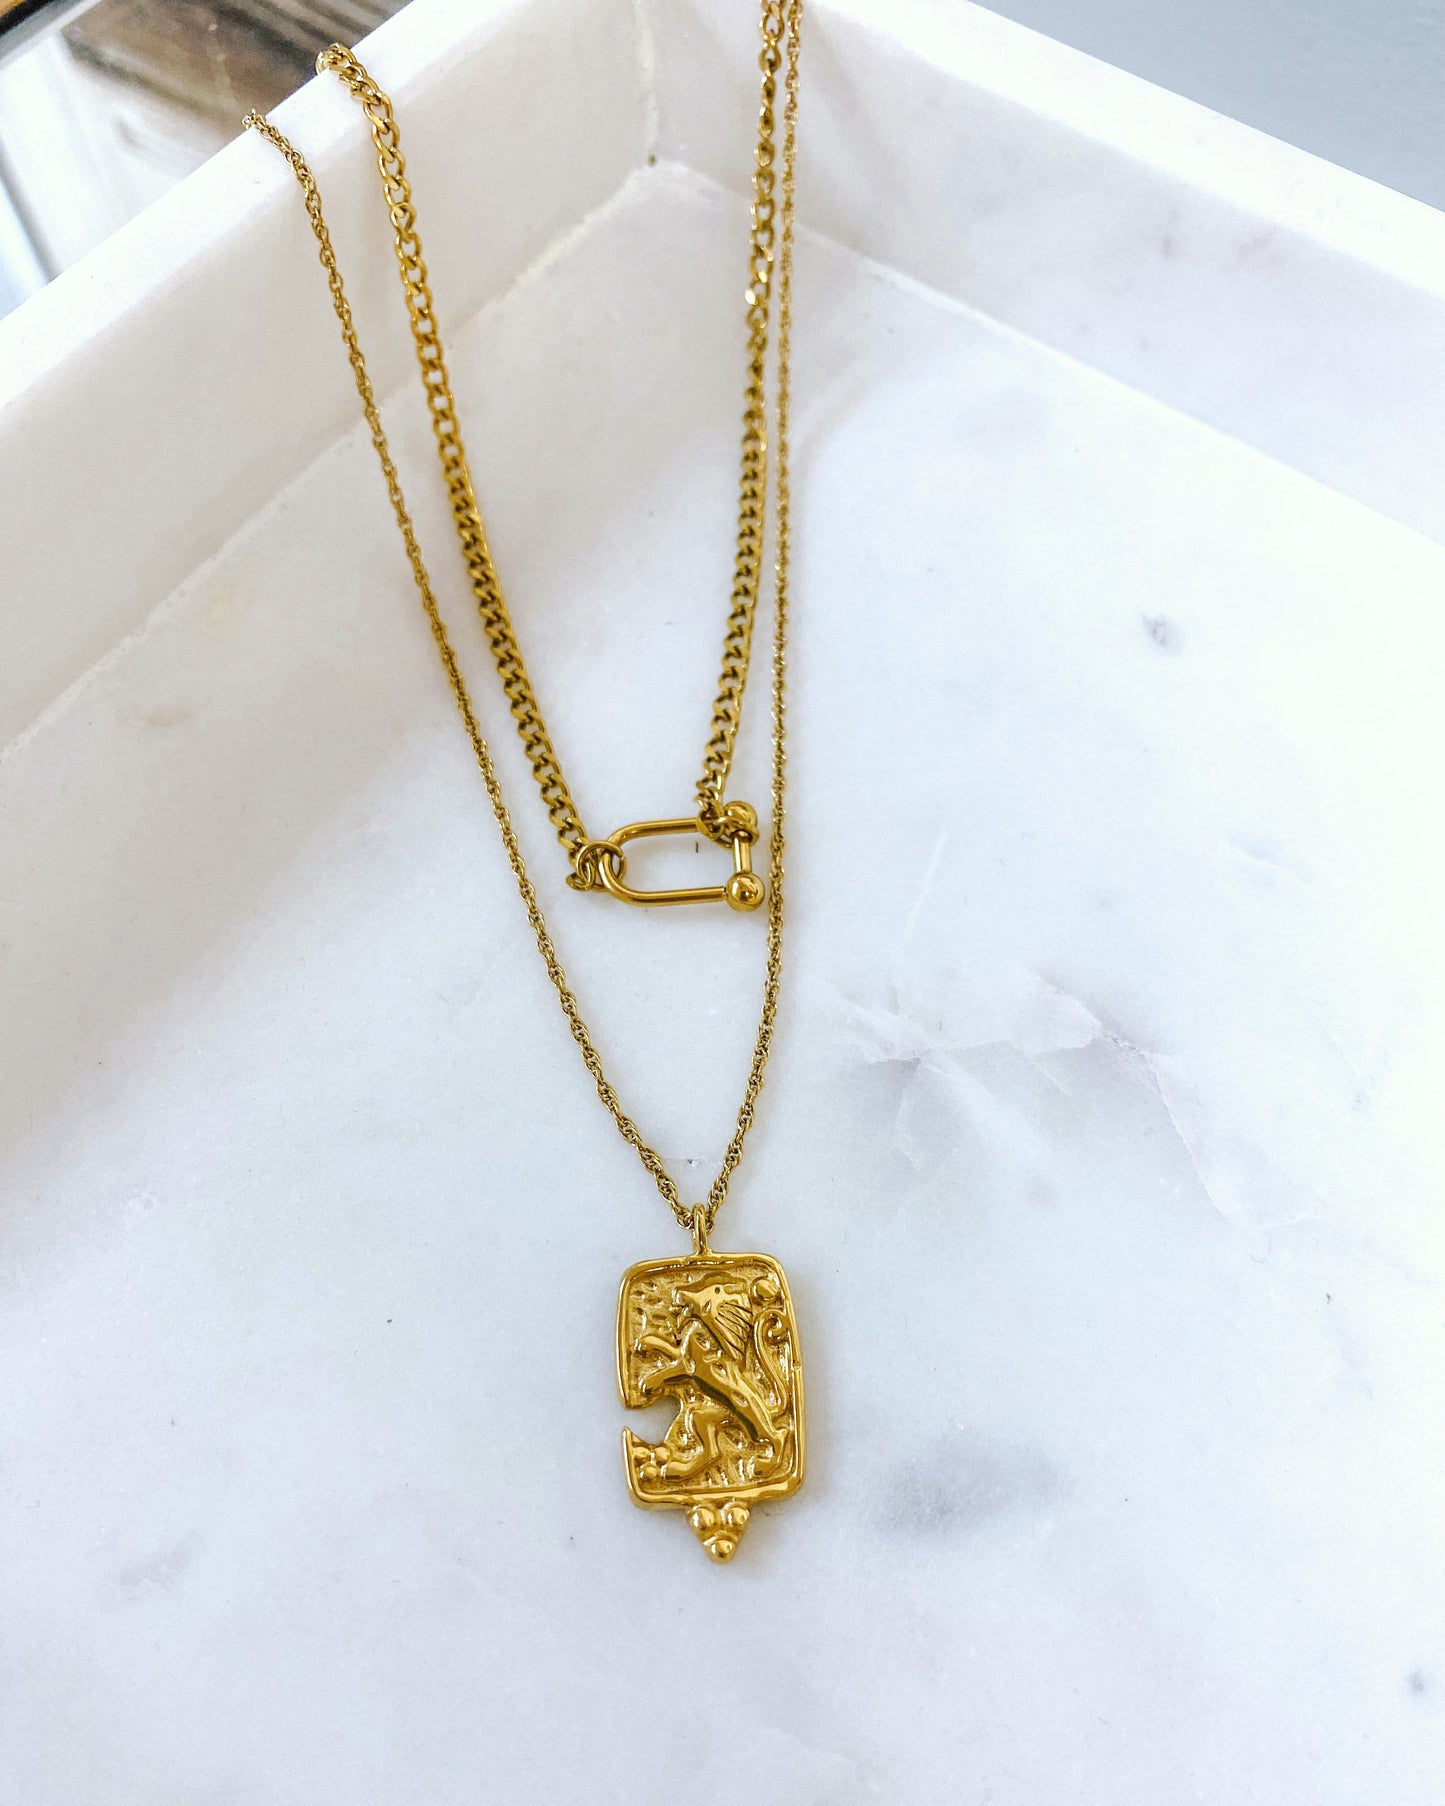 The Lions Gate Necklace